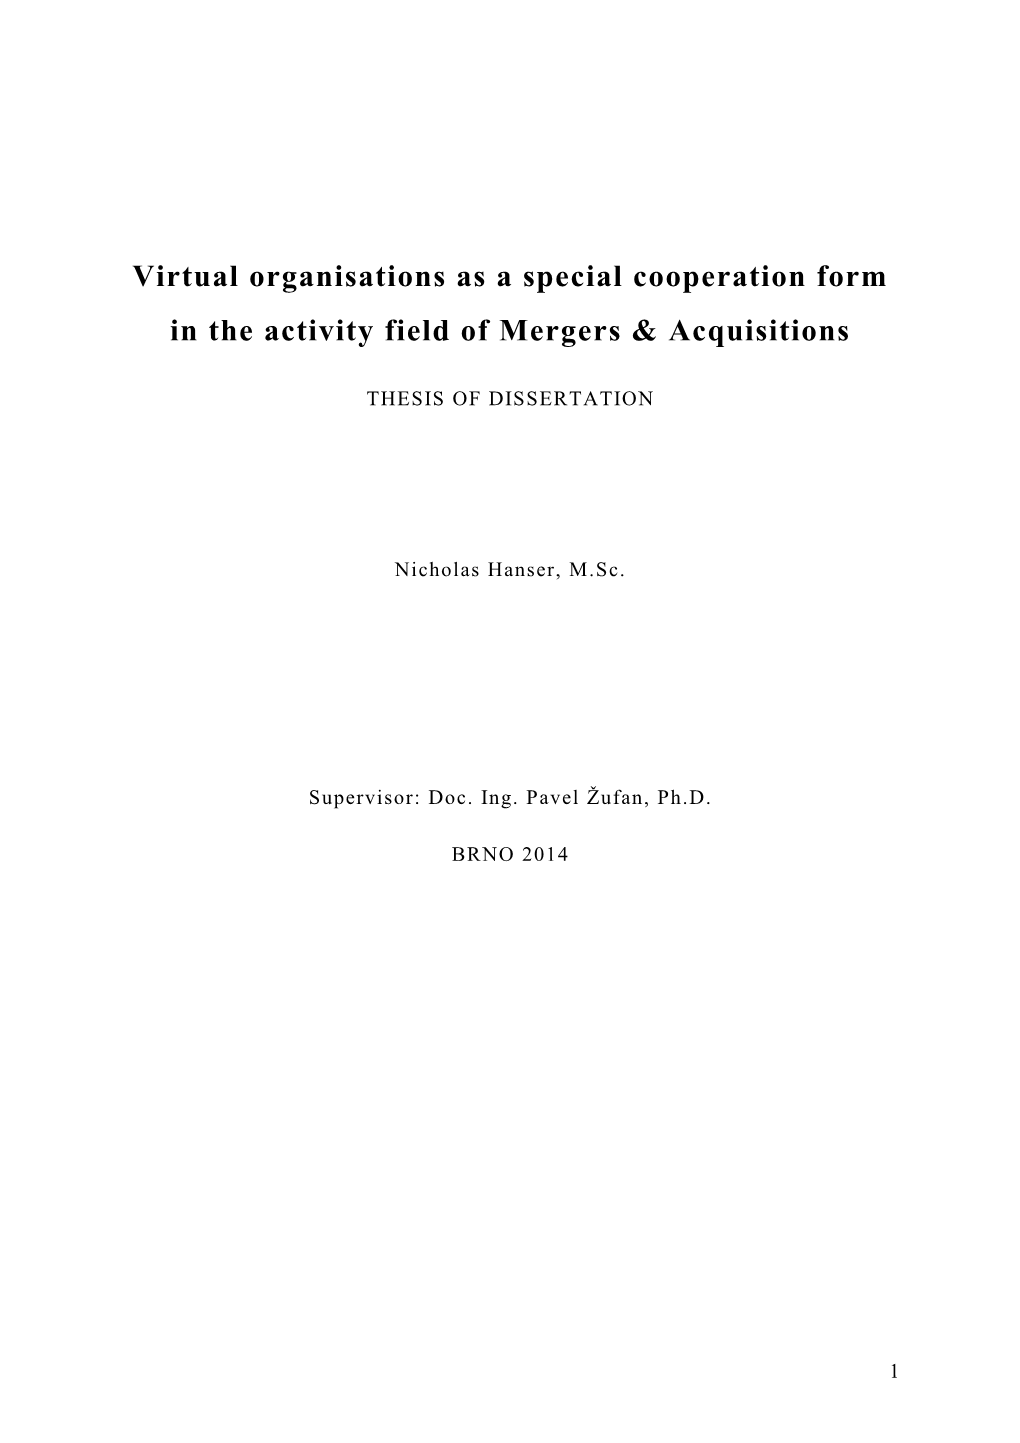 Virtual Organisations As a Special Cooperation Form in the Activity Field Of